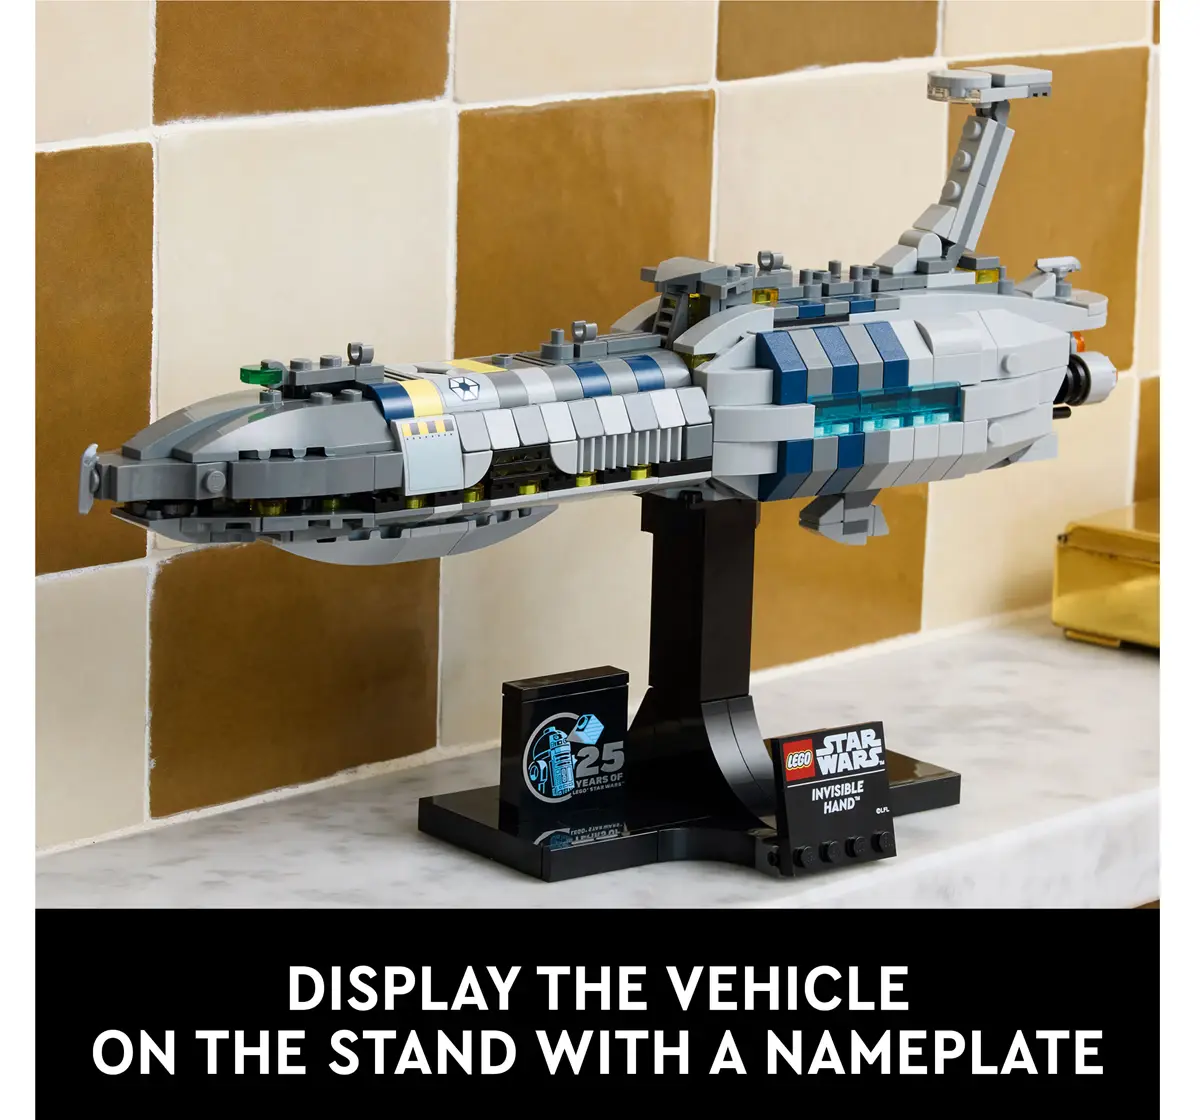 LEGO Star Wars Invisible Hand Building Set 75377 (1212 Pieces)